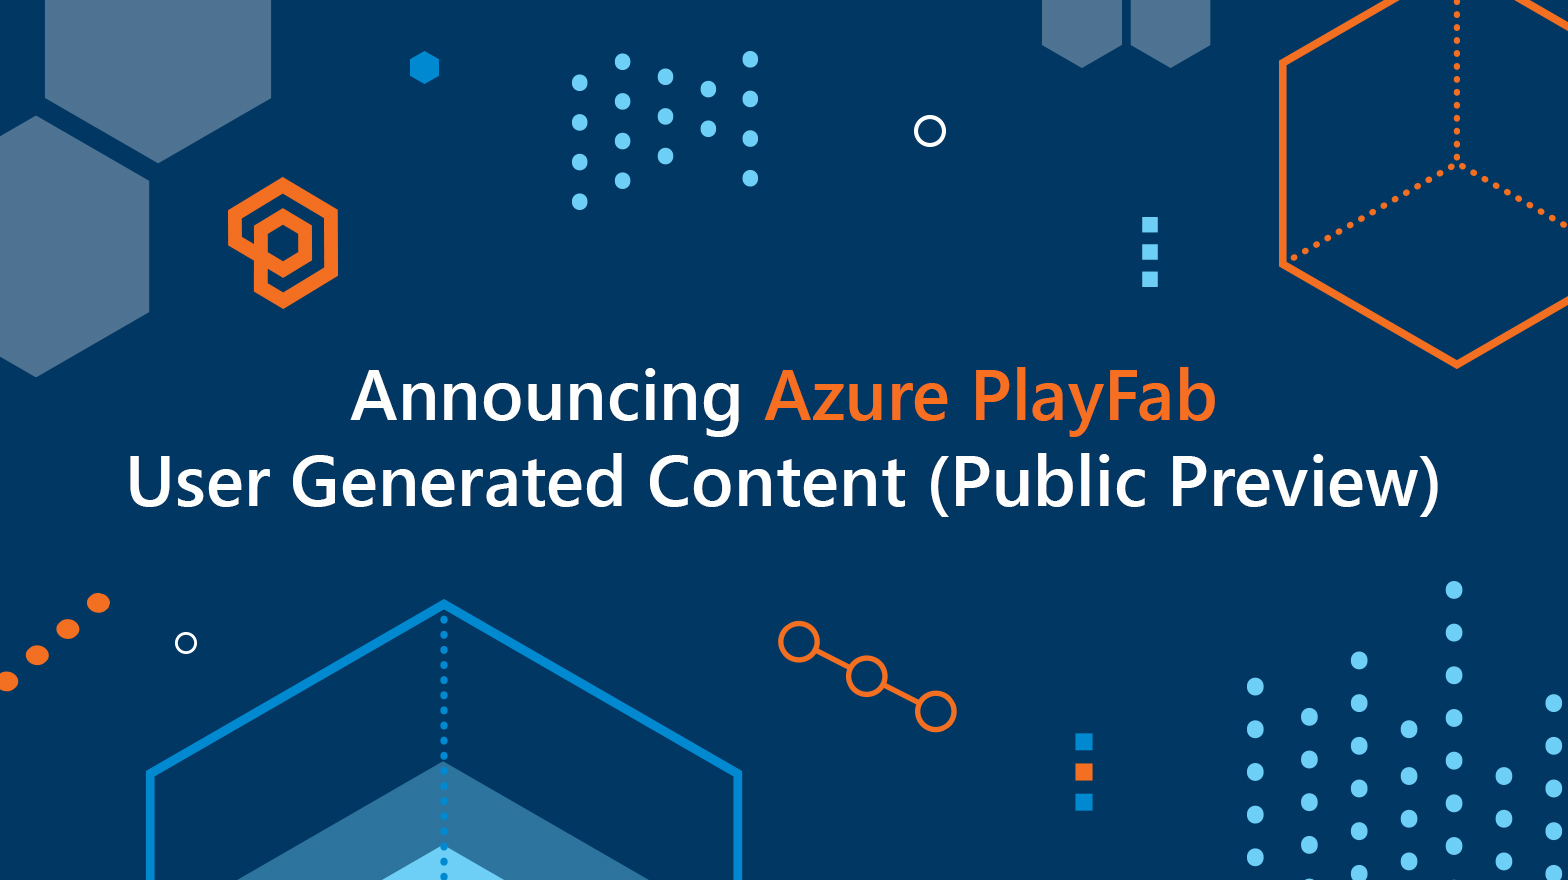 Announcing Azure PlayFab User Generated Content (Public Preview)